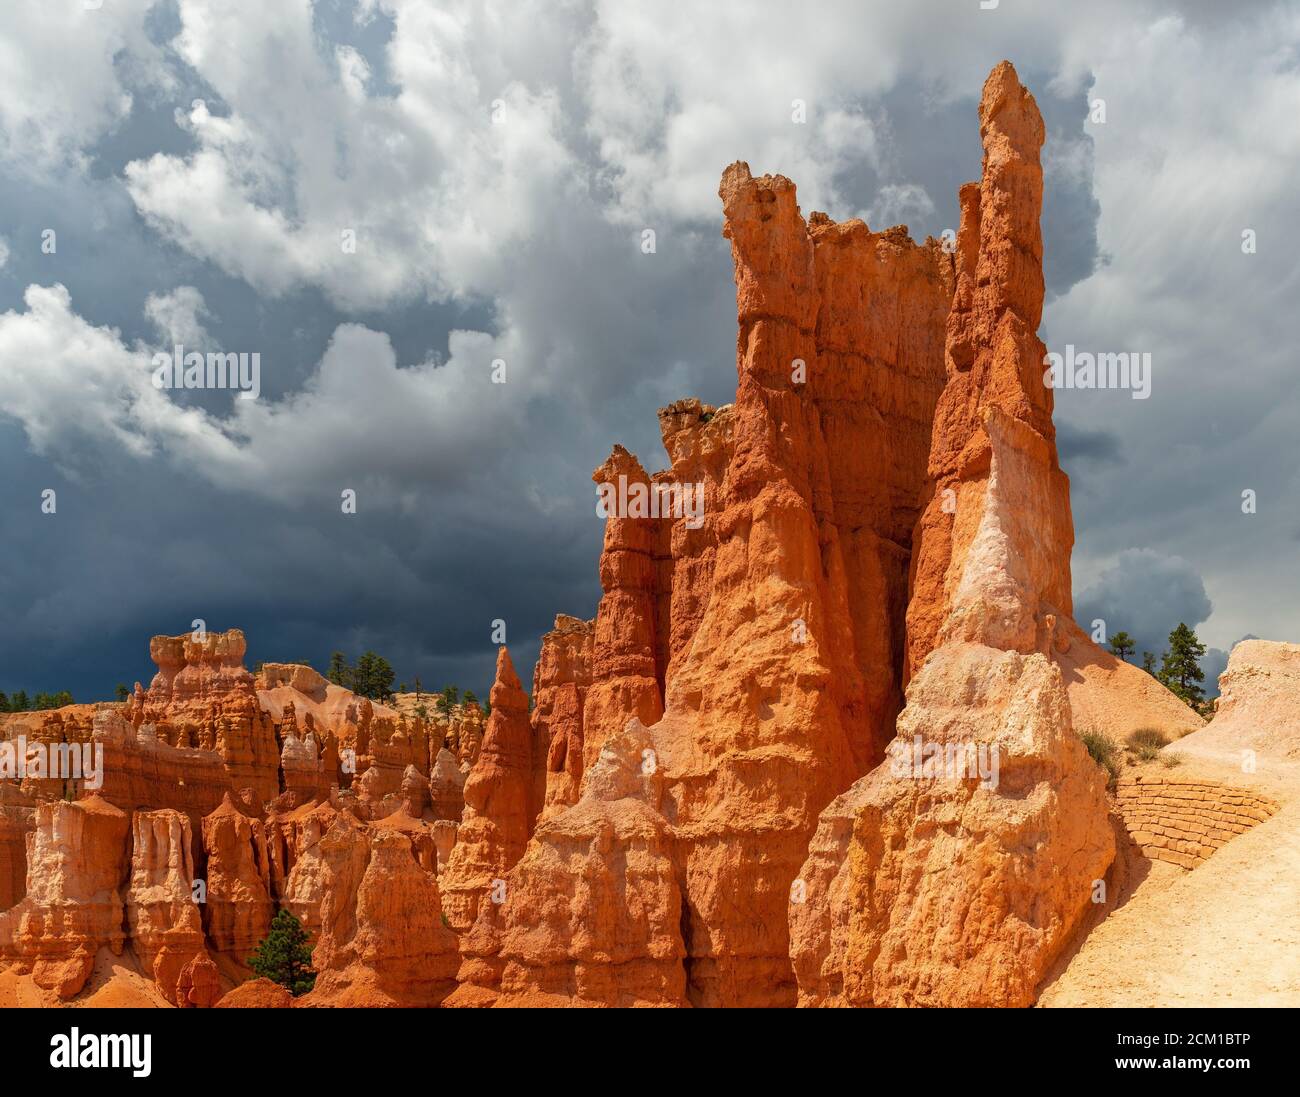 Thunderstorm coming in Bryce Canyon national park with a sunlit Hoodoo rock formation, Utah, United States of America (USA). Stock Photo